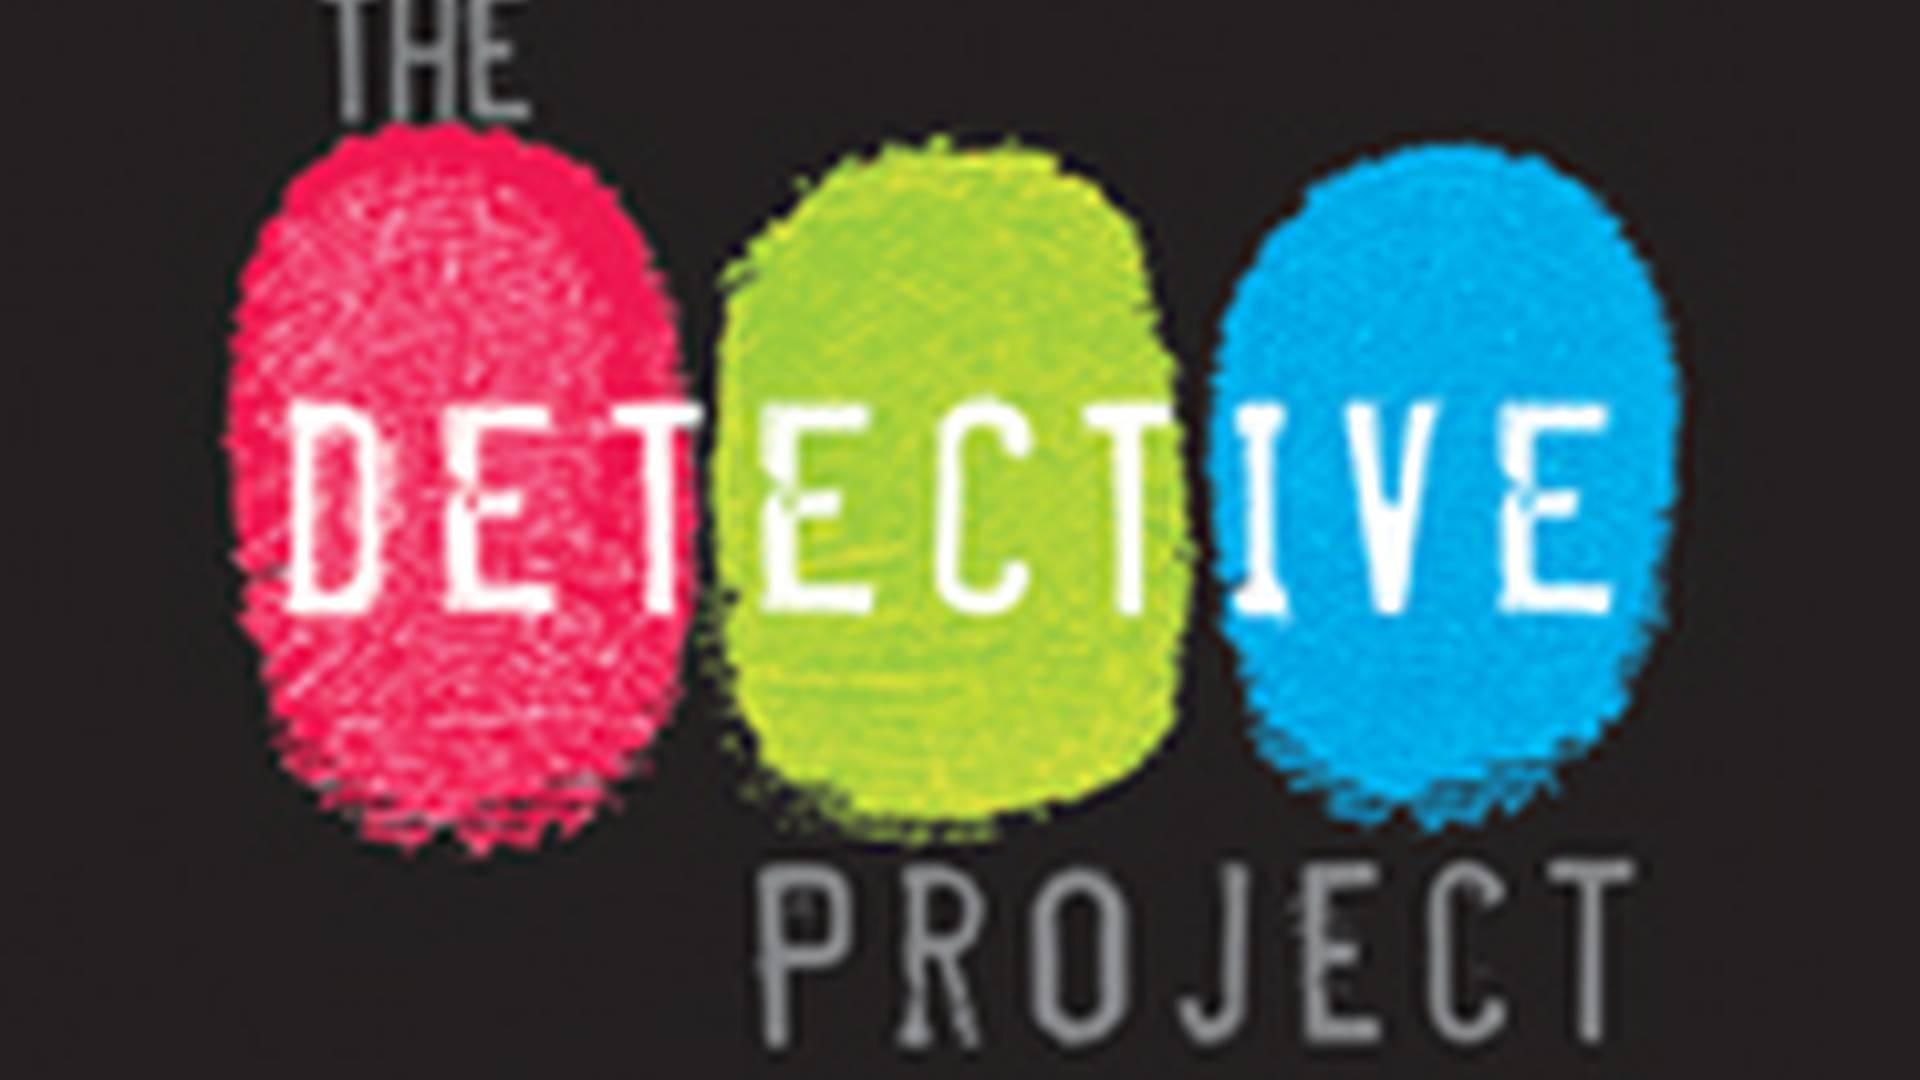 The Detective Project photo